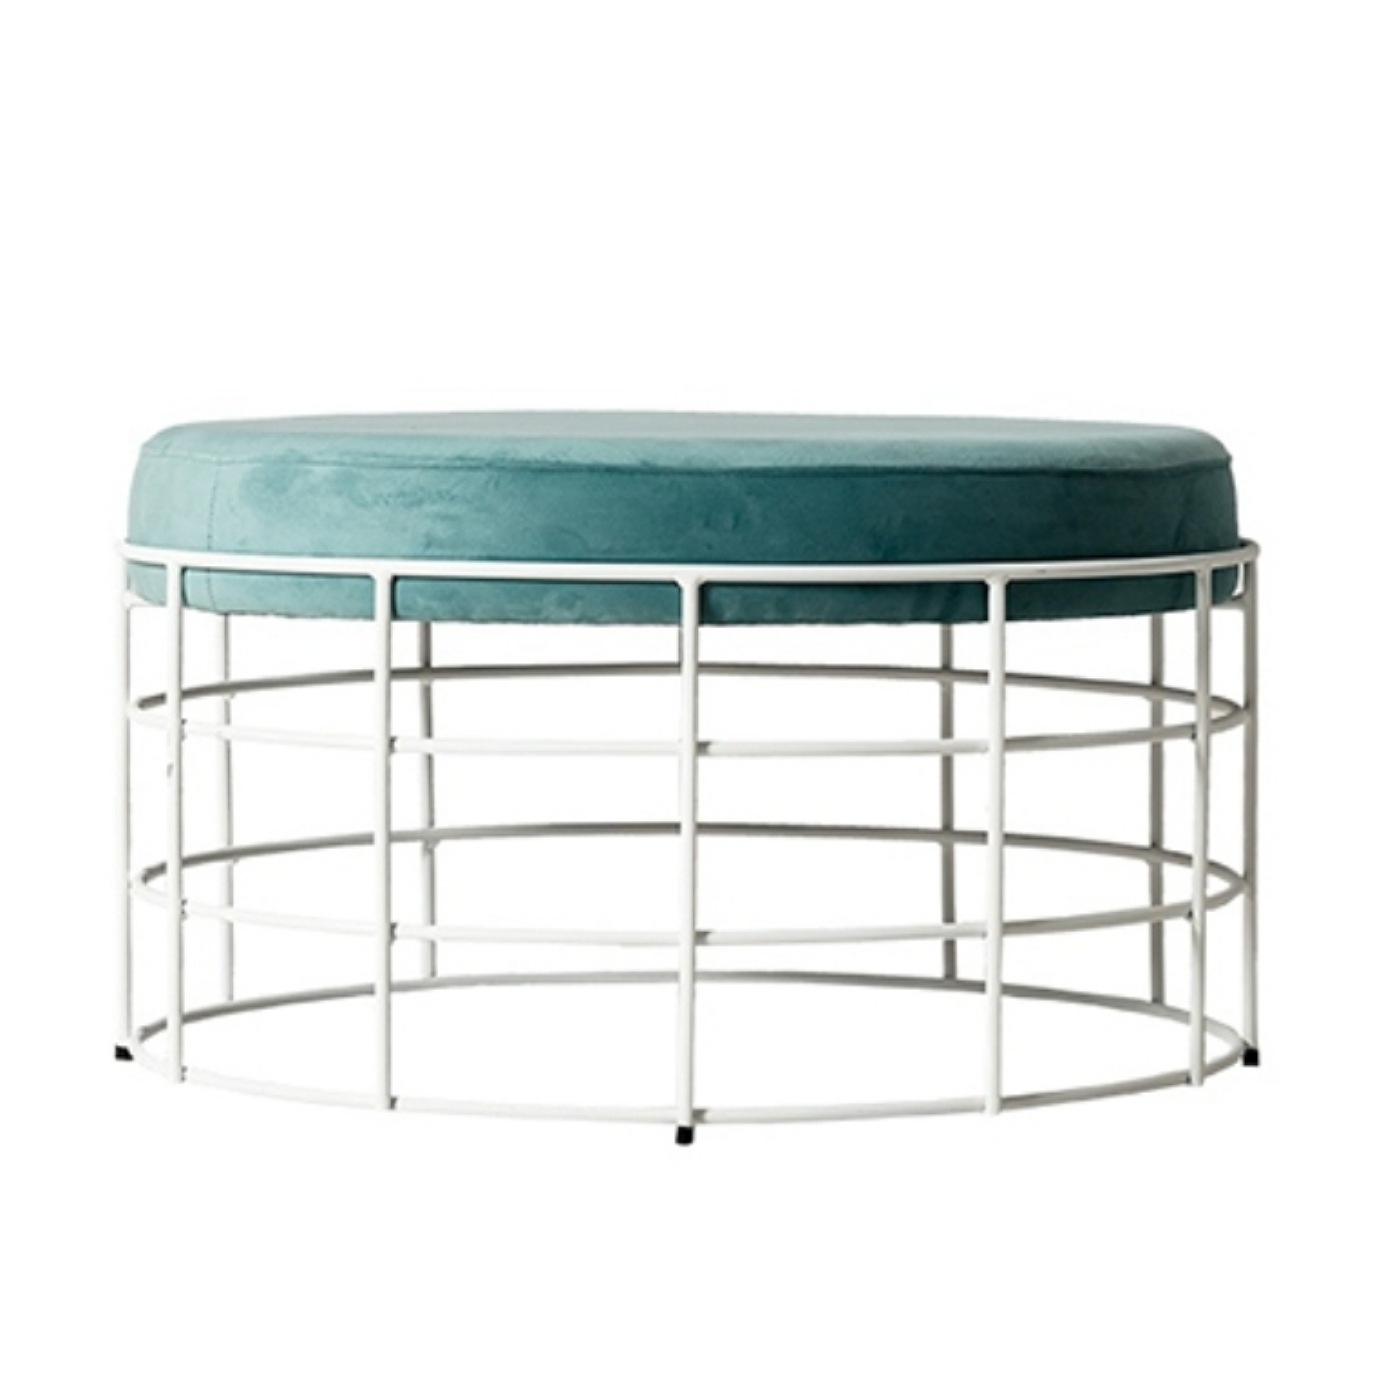 Round Ottoman With White Steel Frame And Round Blue Cushion.